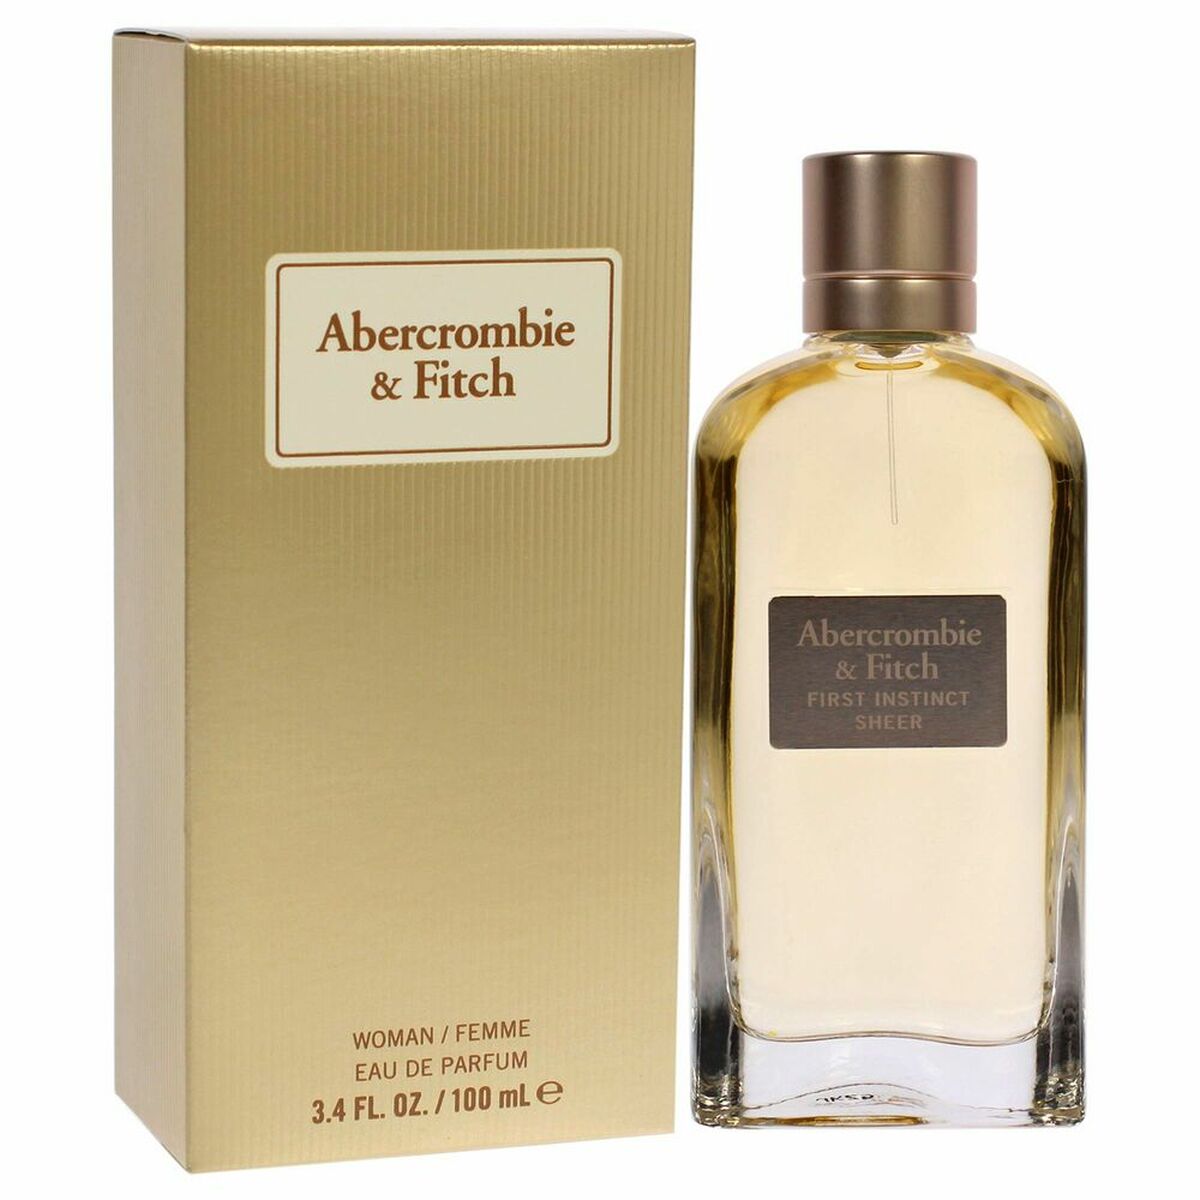 Profumo Donna Abercrombie & Fitch First Instinct Sheer EDP (100 ml)